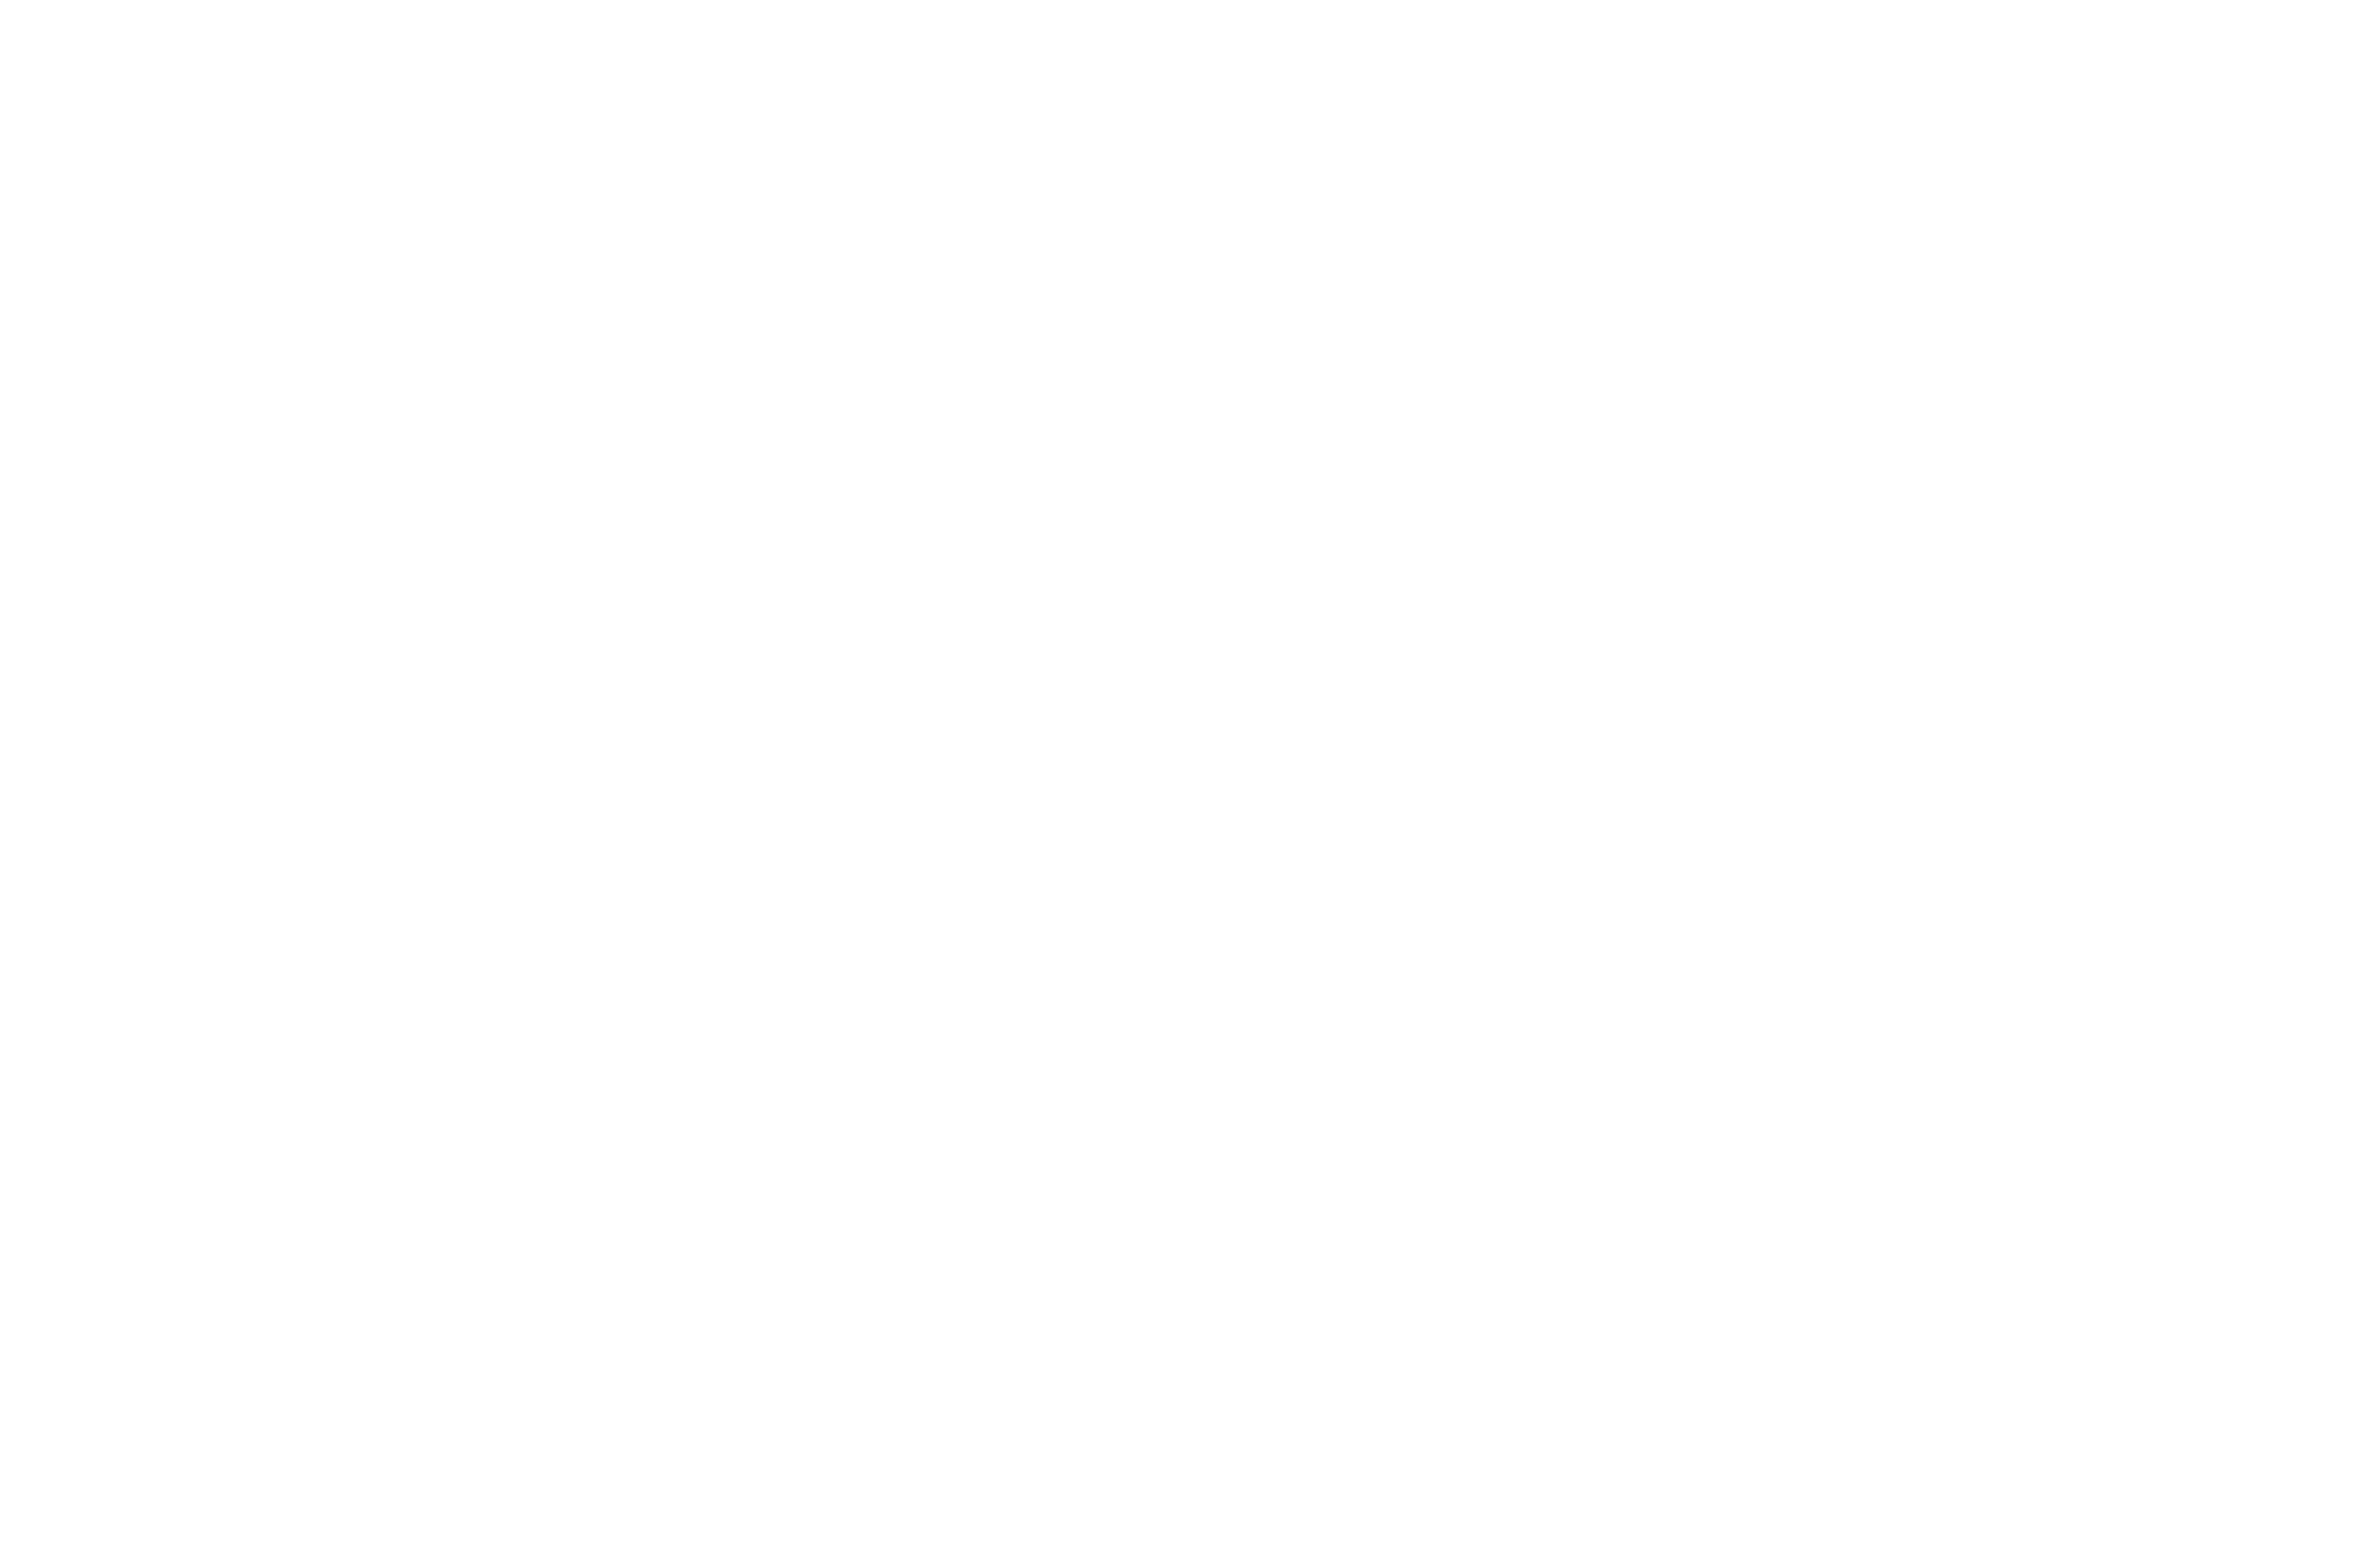 Let's enjoy dancing to the max